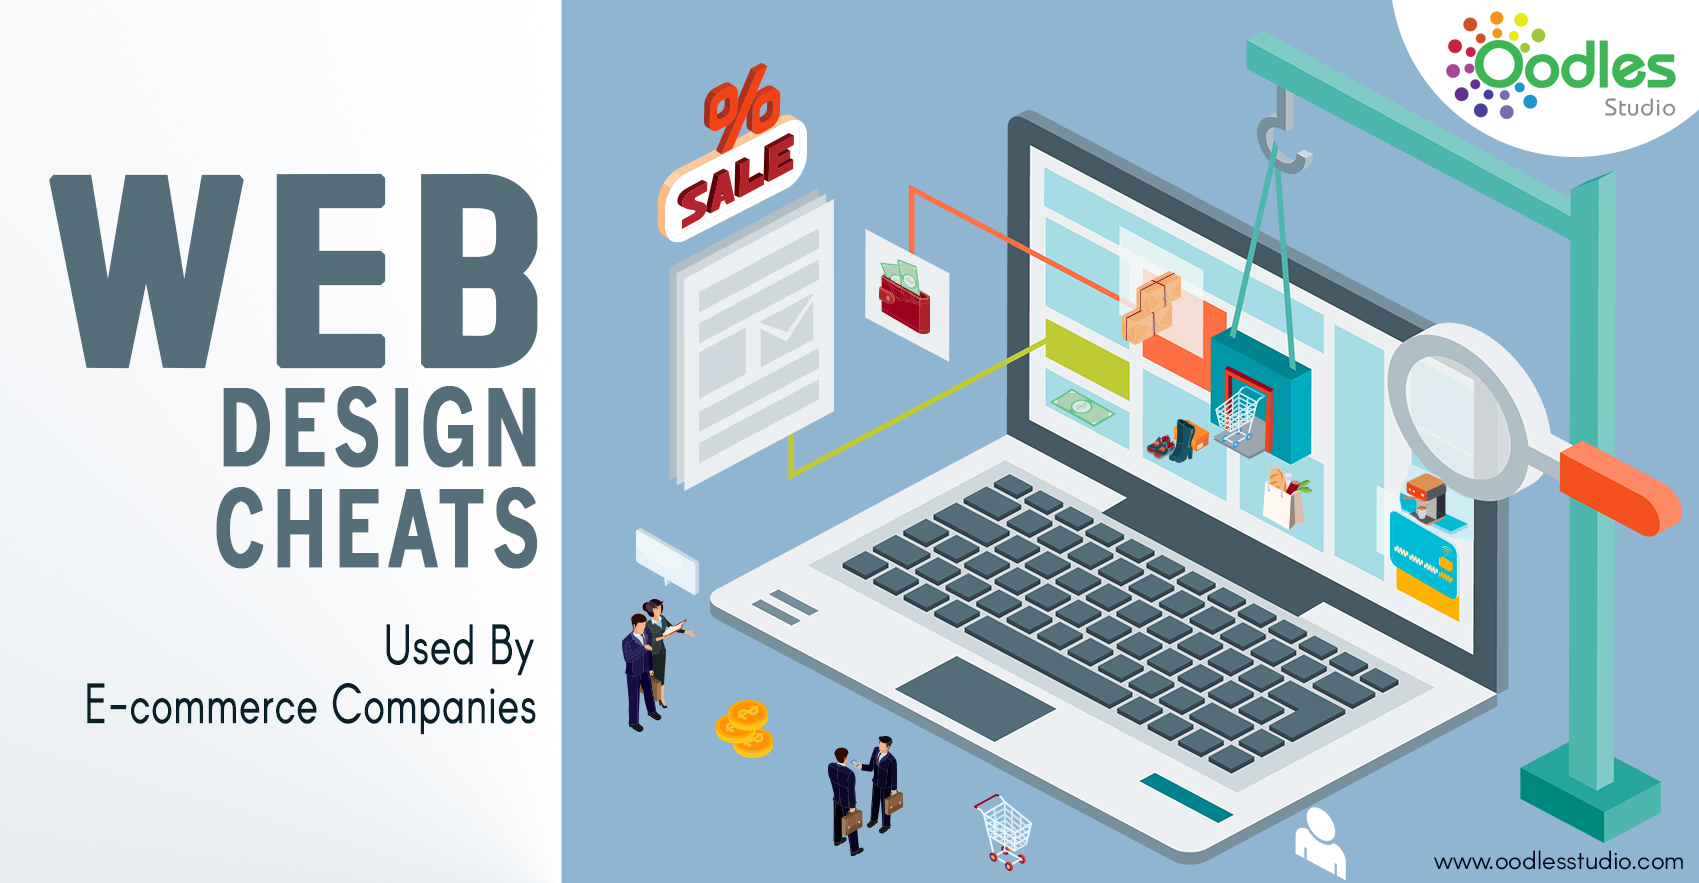 Web Design Cheats Used By ECommerce Companies